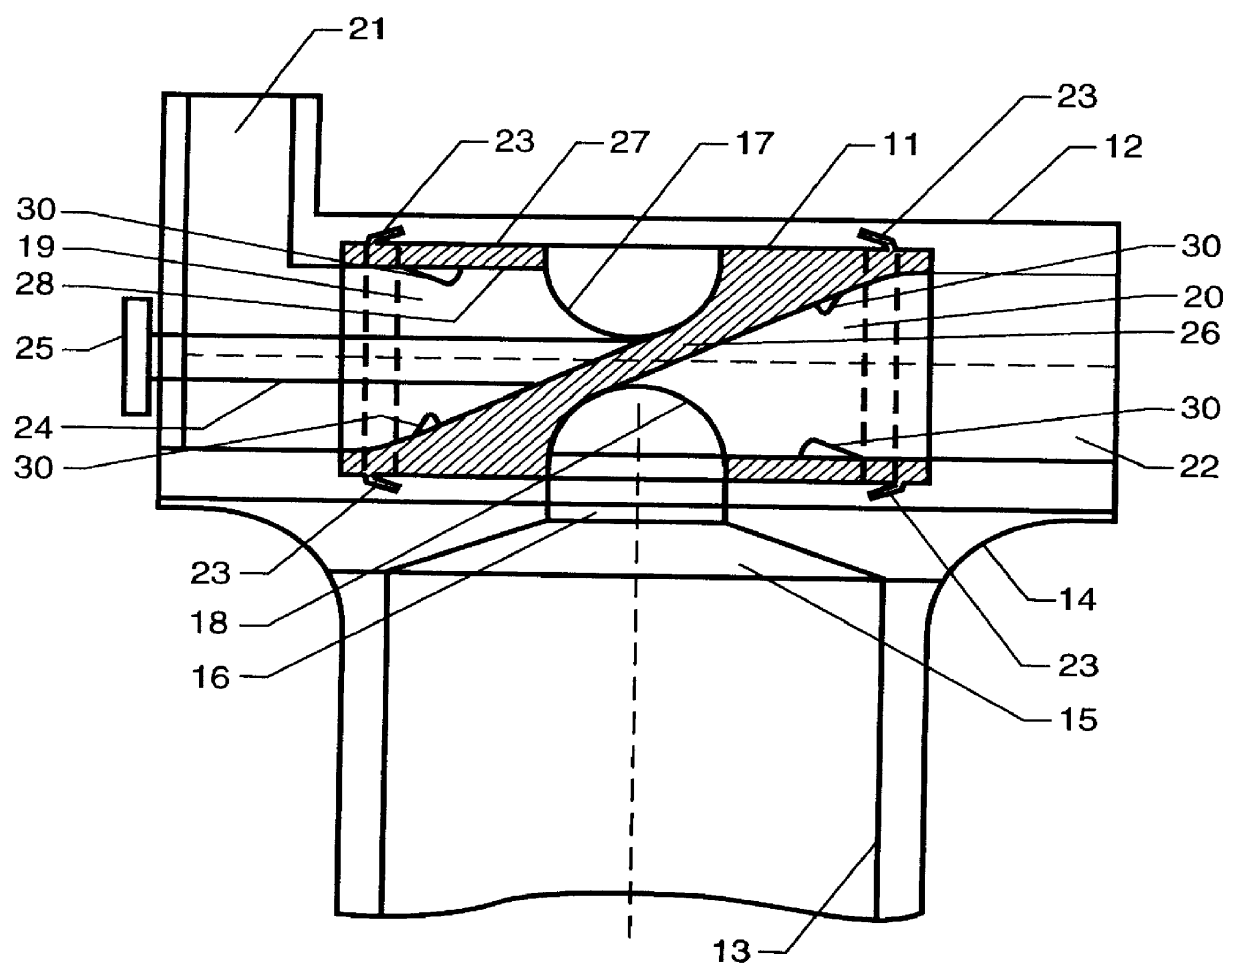 Carbon fiber reinforced carbon composite rotary valve for an internal combustion engine